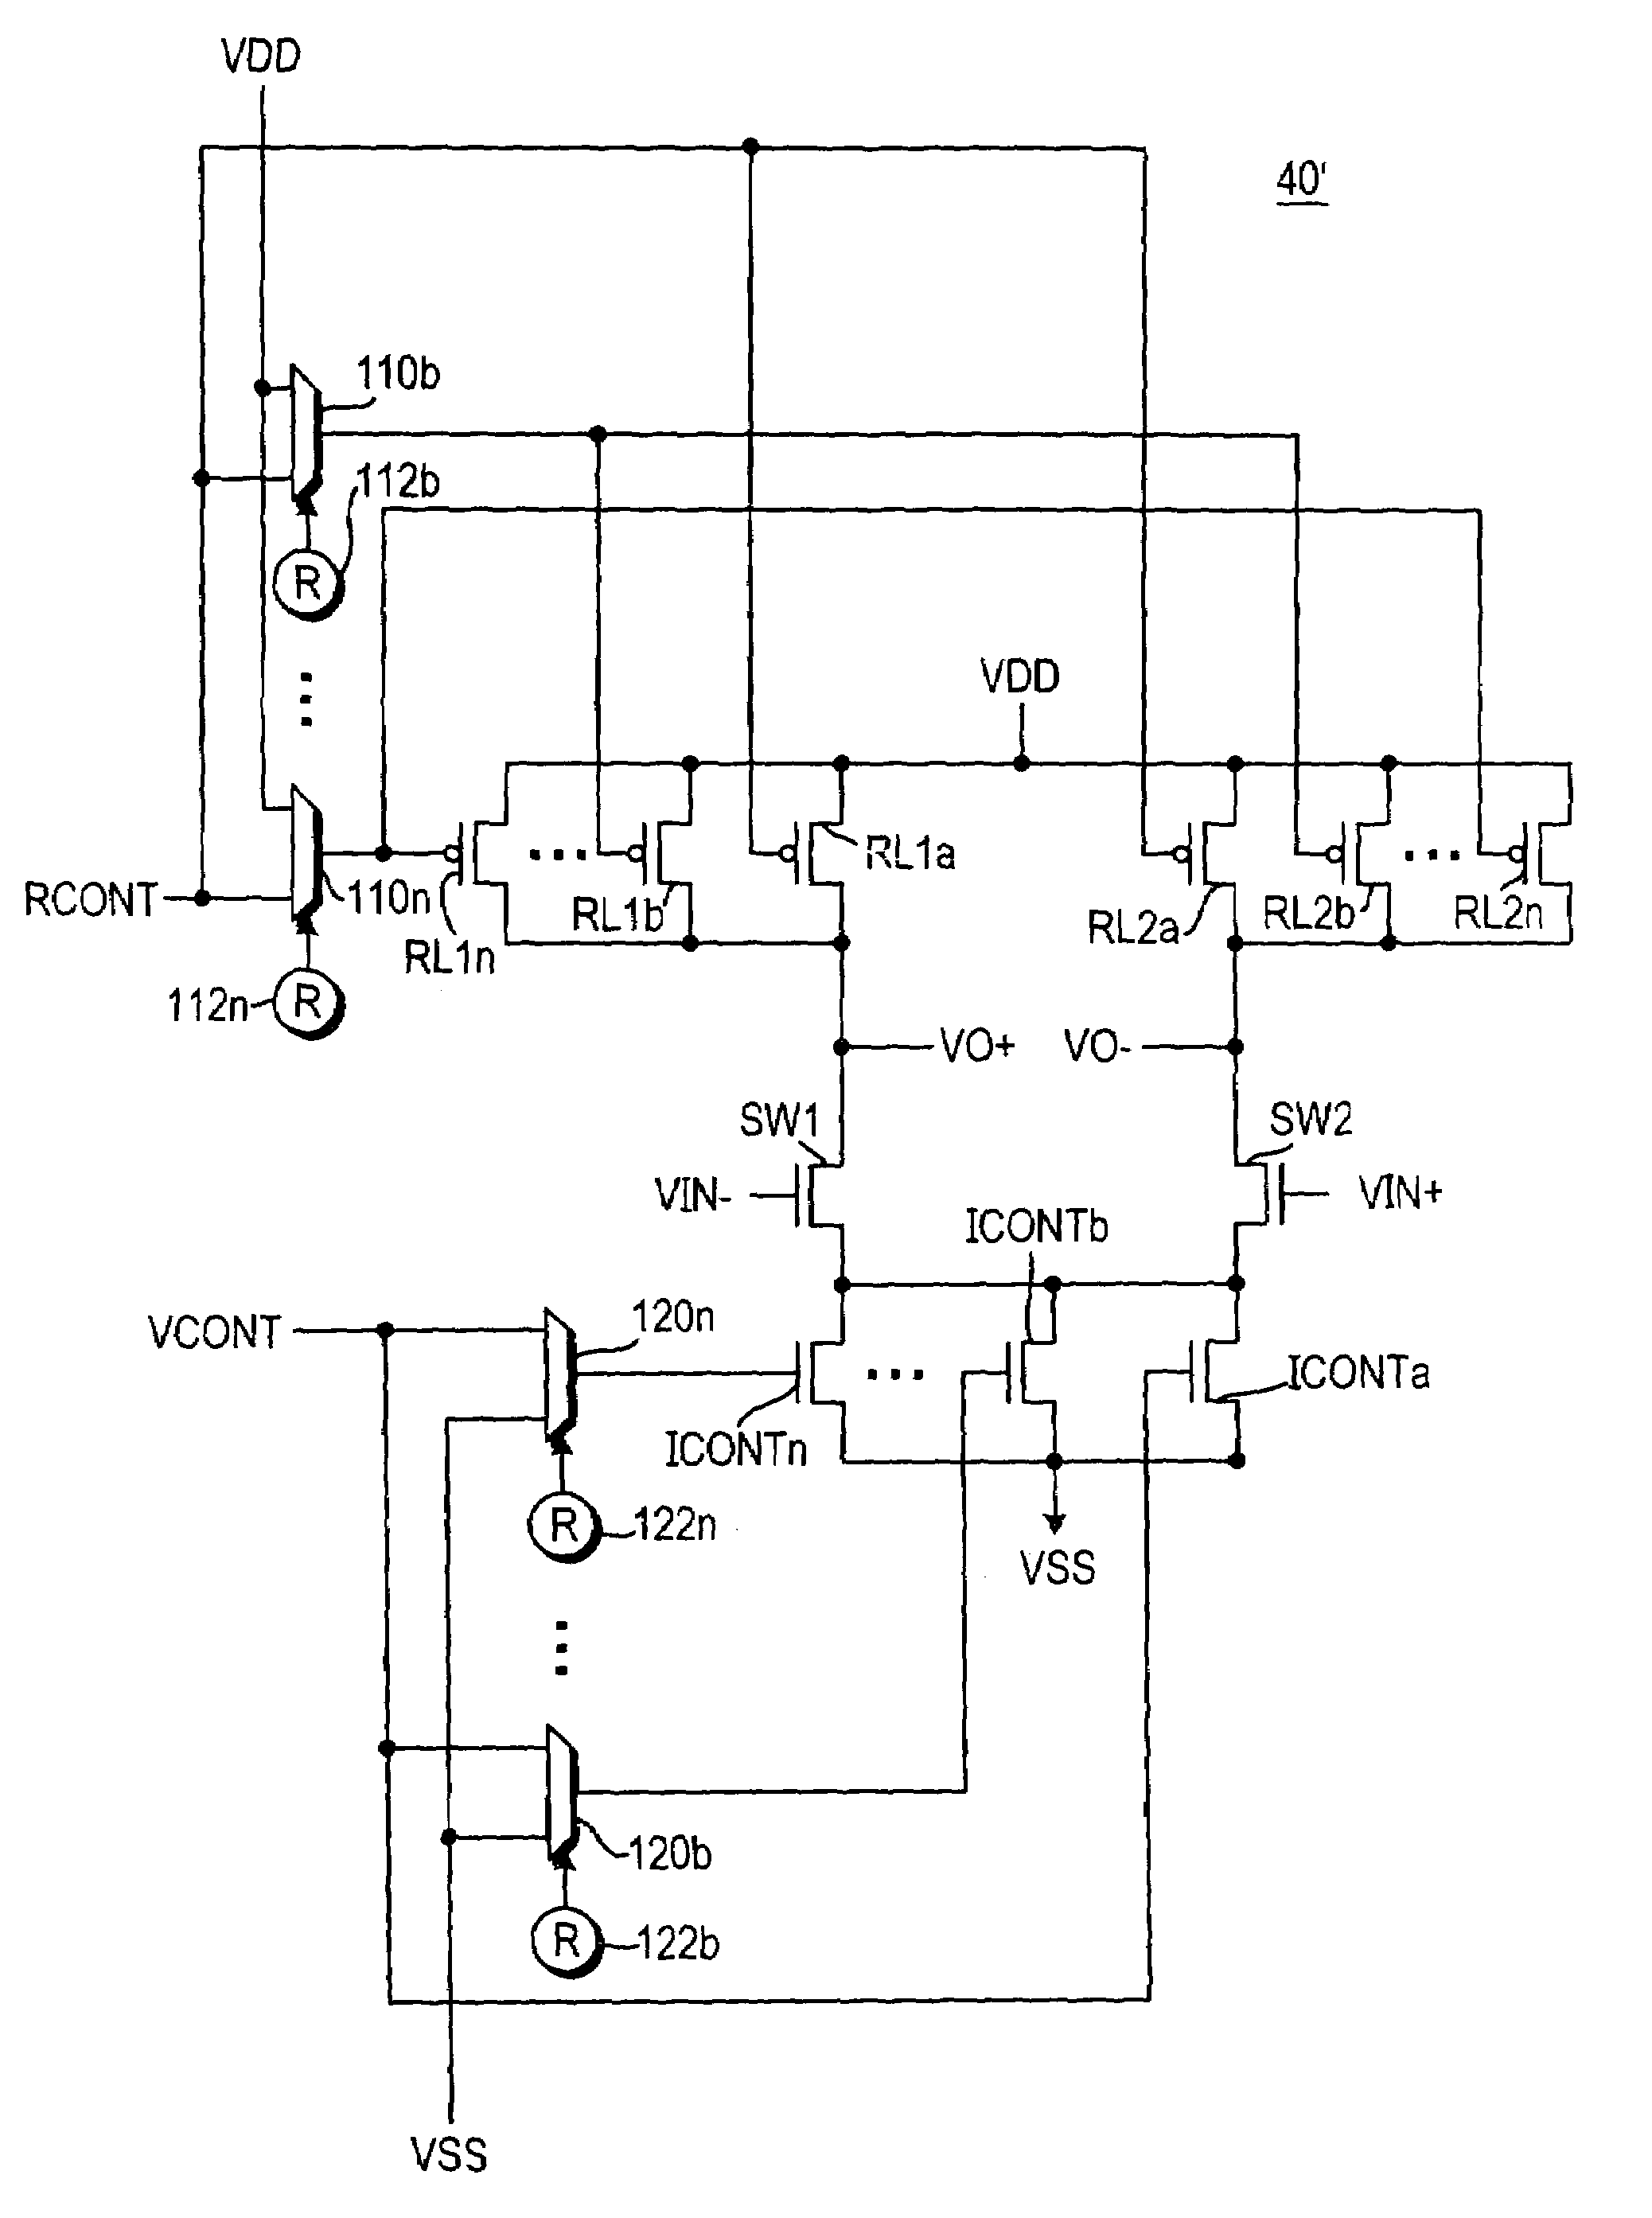 Voltage controlled oscillator programmable delay cells